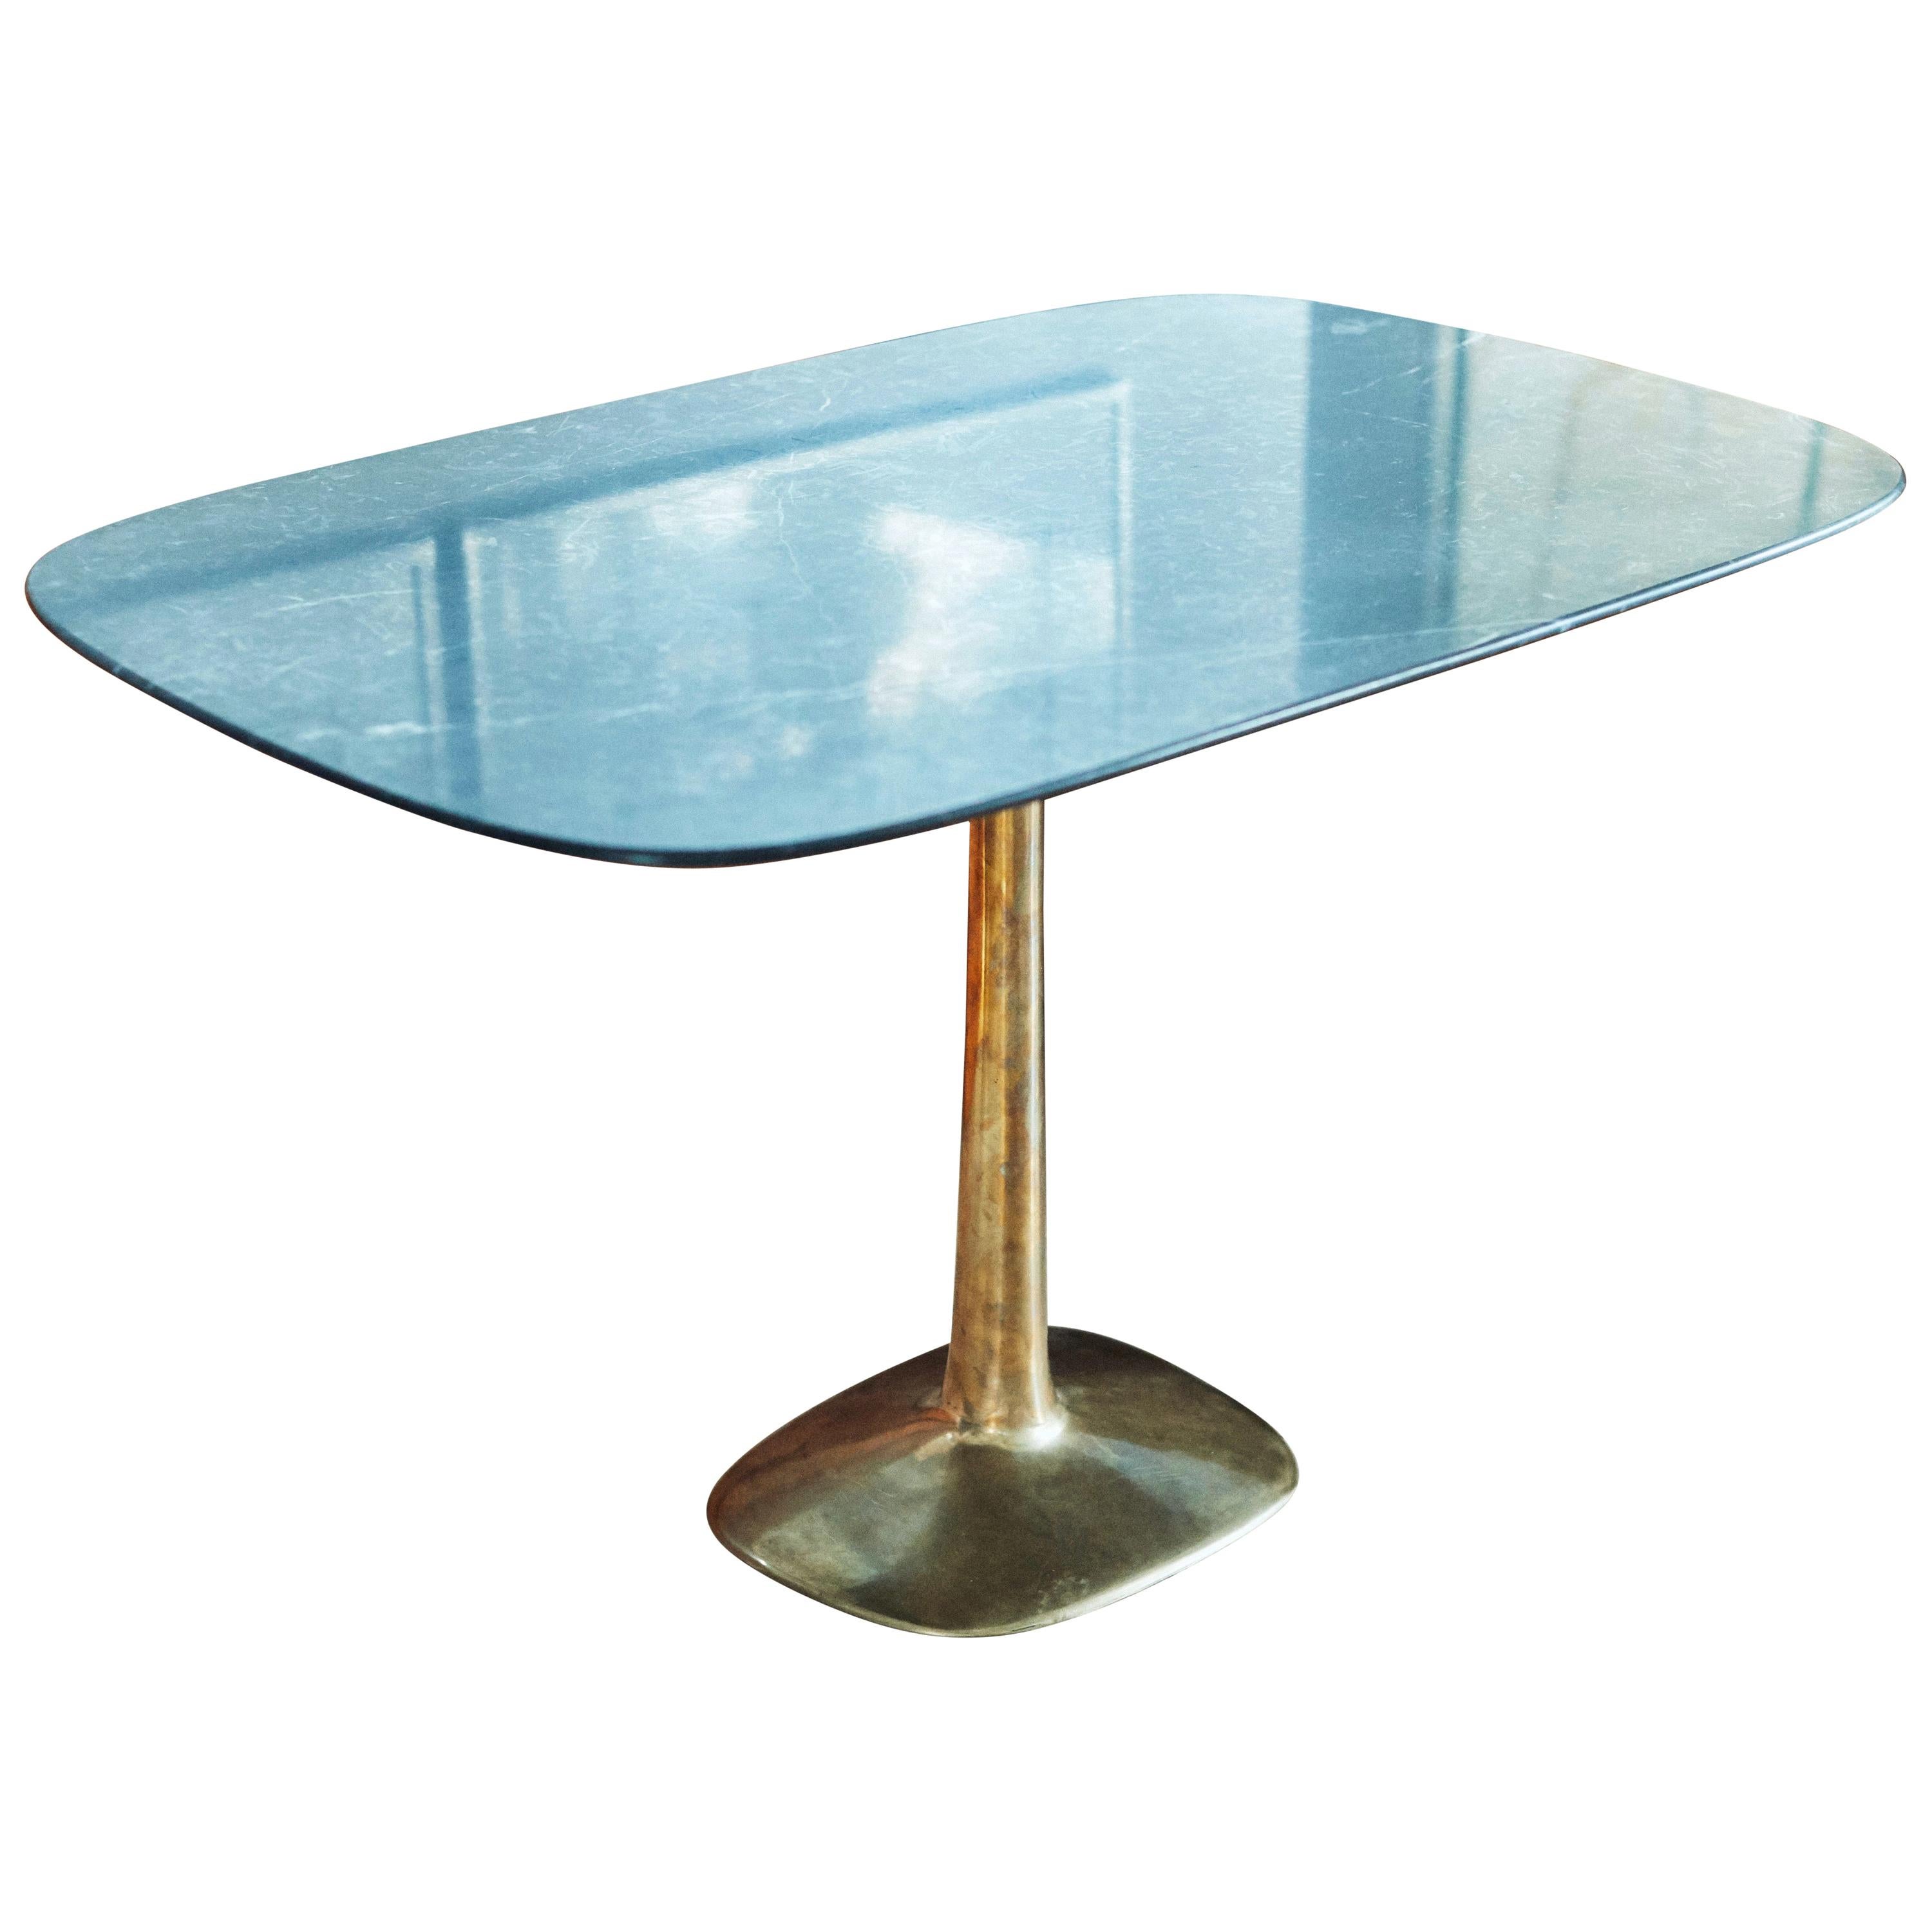 Barbera 'Molecule' Table, Modern Solid Bronze Base with Stone Top